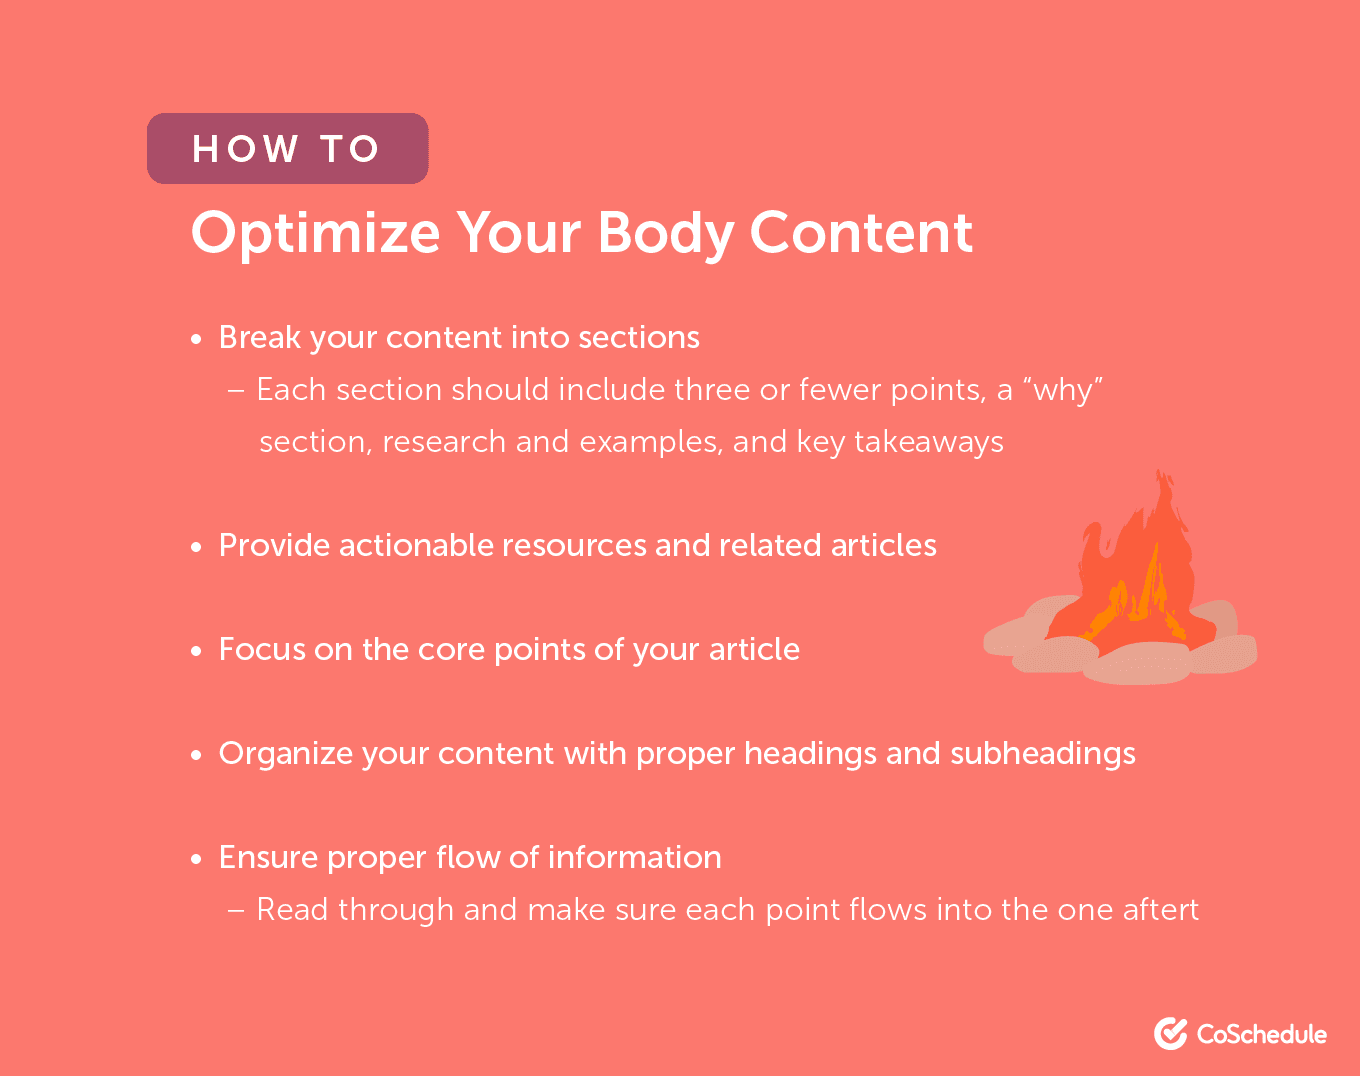 How to Optimize Your Body Content